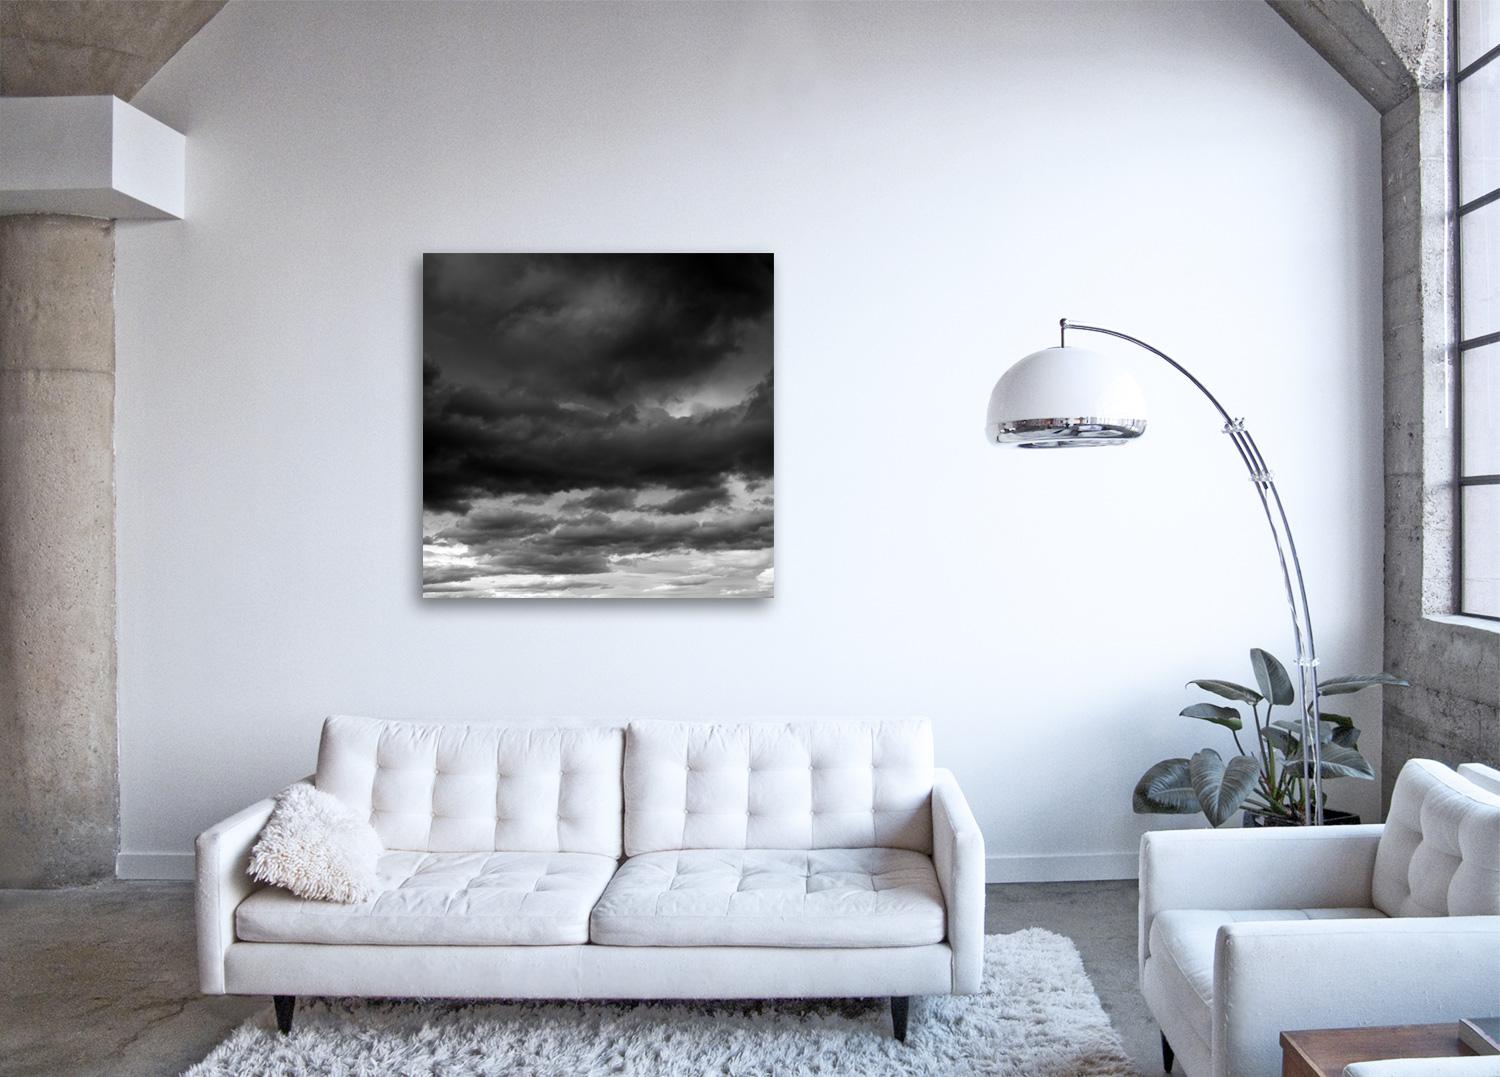 Cloud Study III - large format photograph of dramatic cloudscape sky - Contemporary Print by Frank Schott